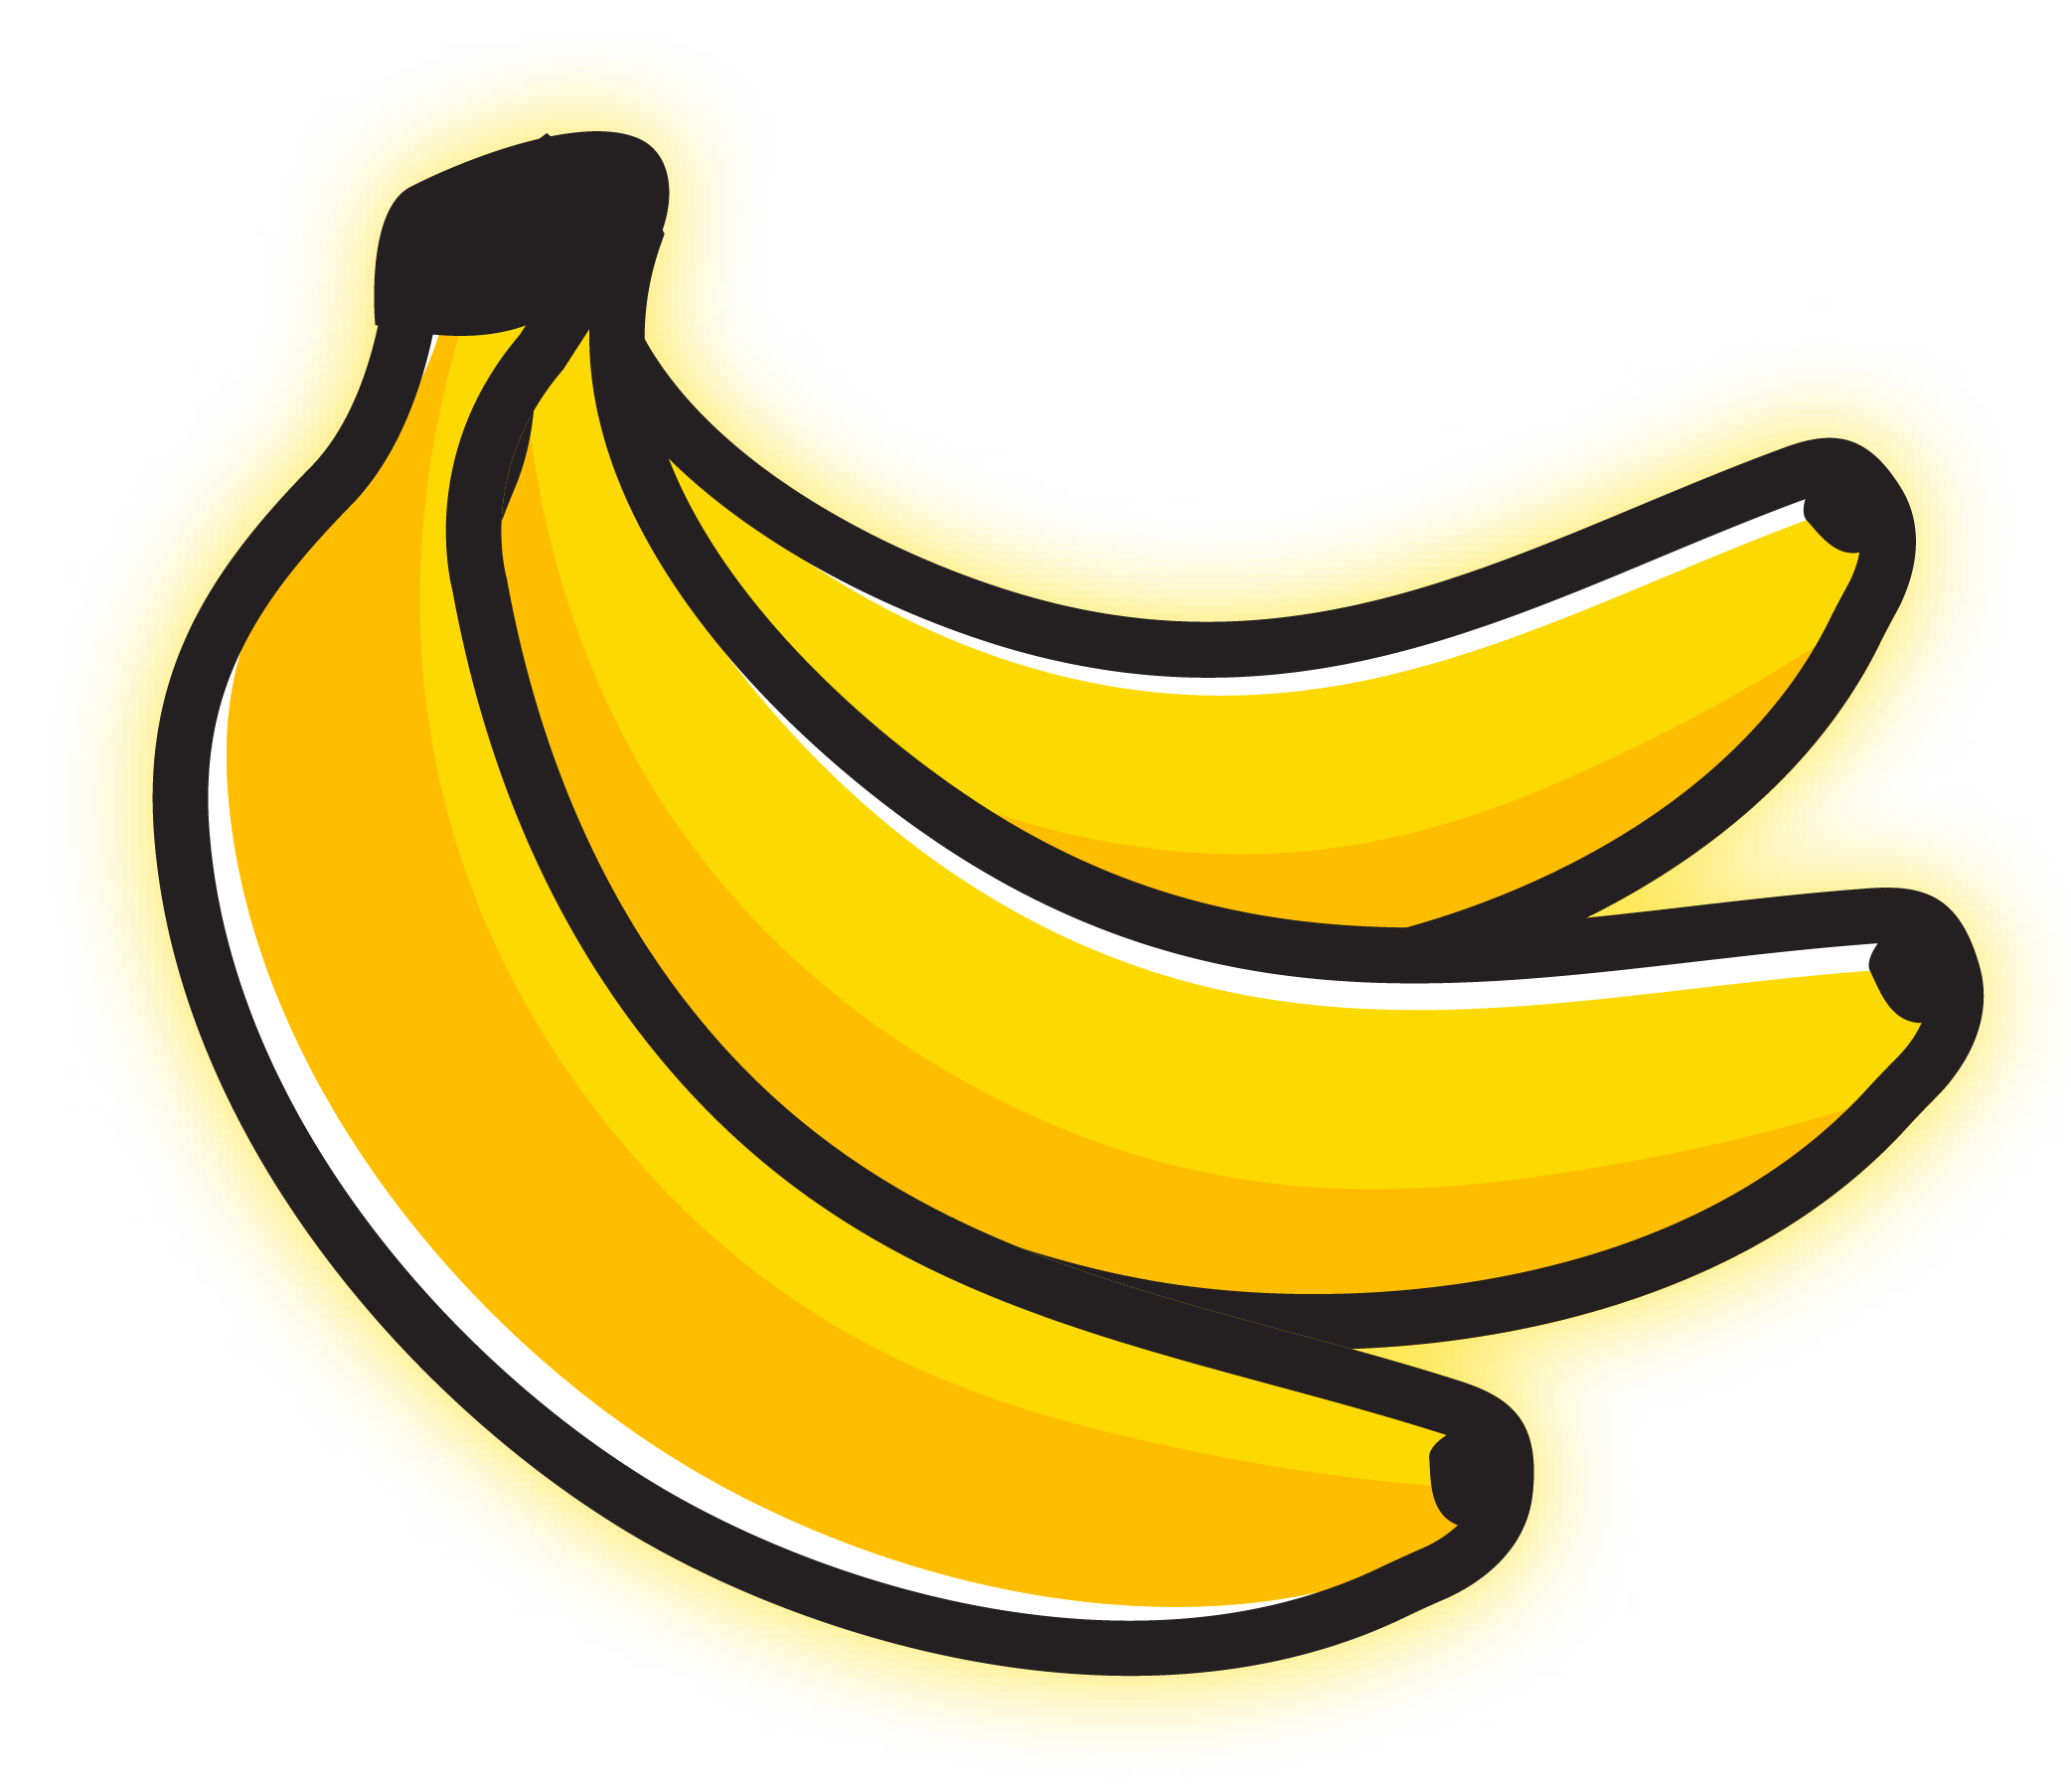 Banana - go to fruit for an athlete